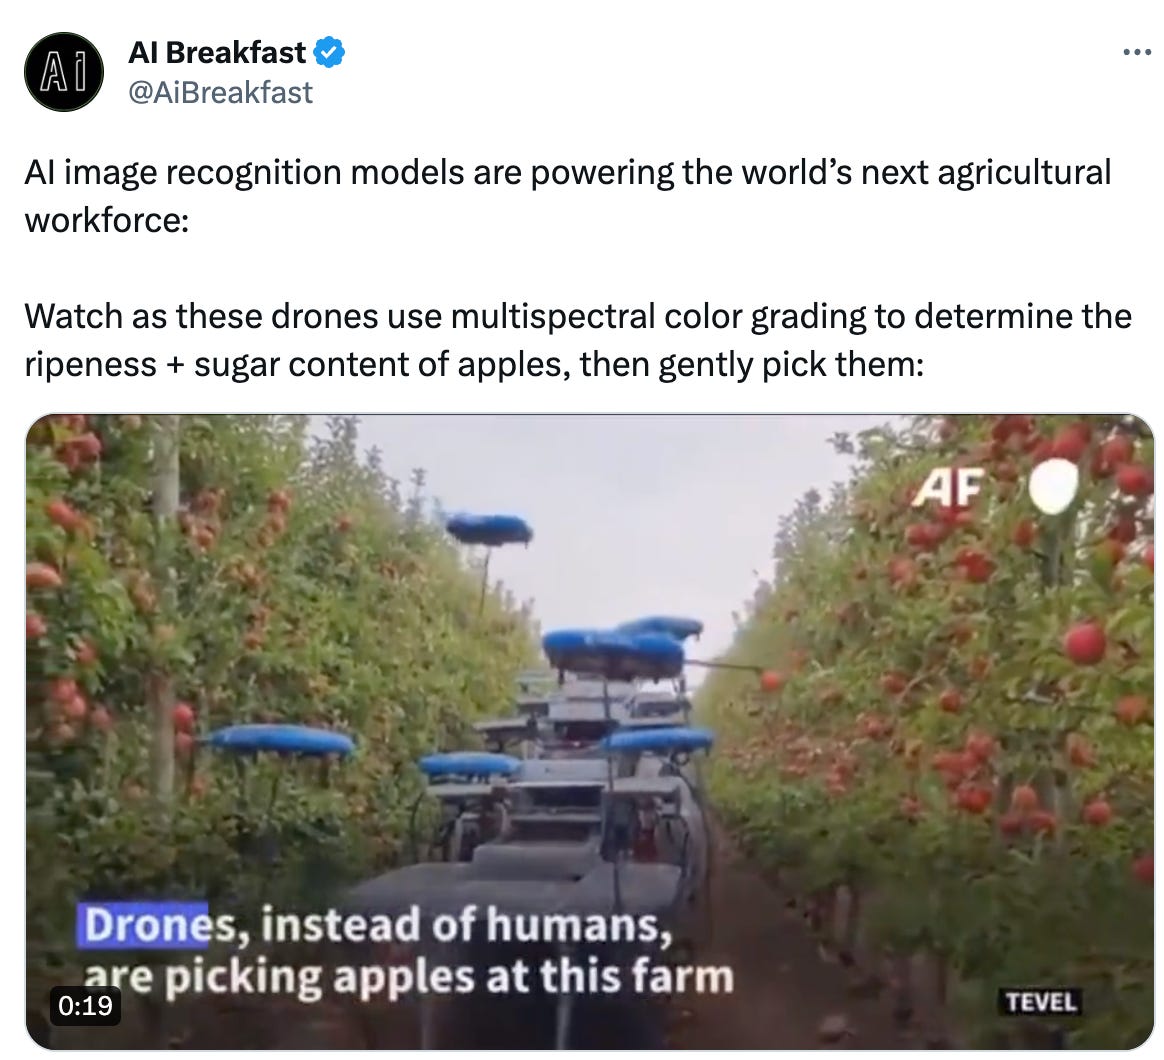  AI Breakfast @AiBreakfast AI image recognition models are powering the world’s next agricultural workforce:  Watch as these drones use multispectral color grading to determine the ripeness + sugar content of apples, then gently pick them: